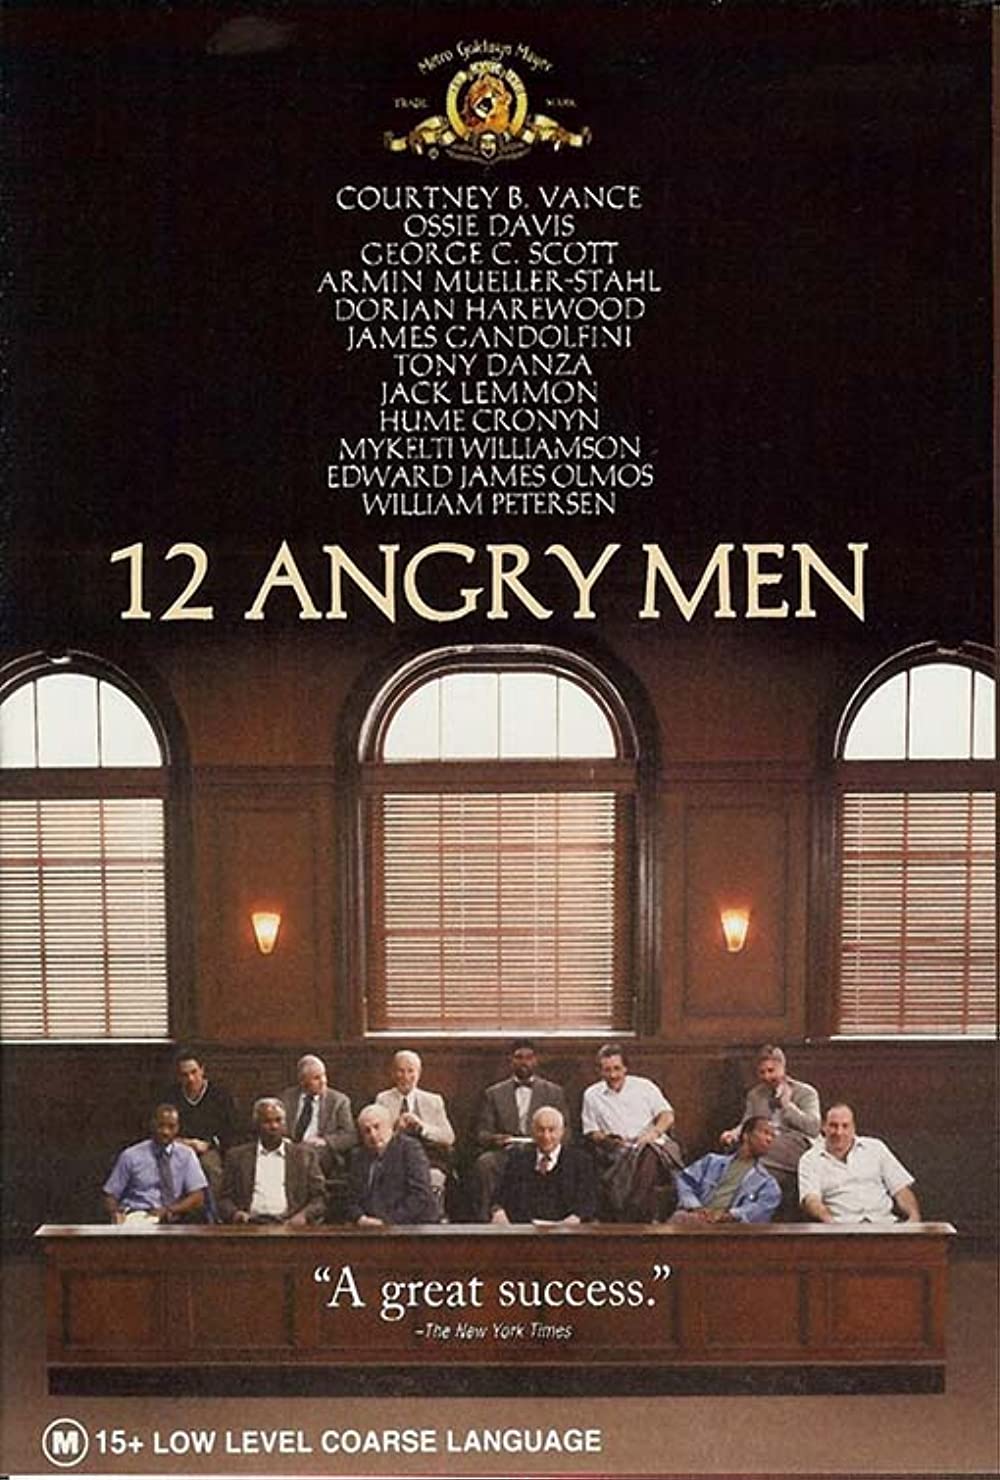 12 Angry Men inspirational movies